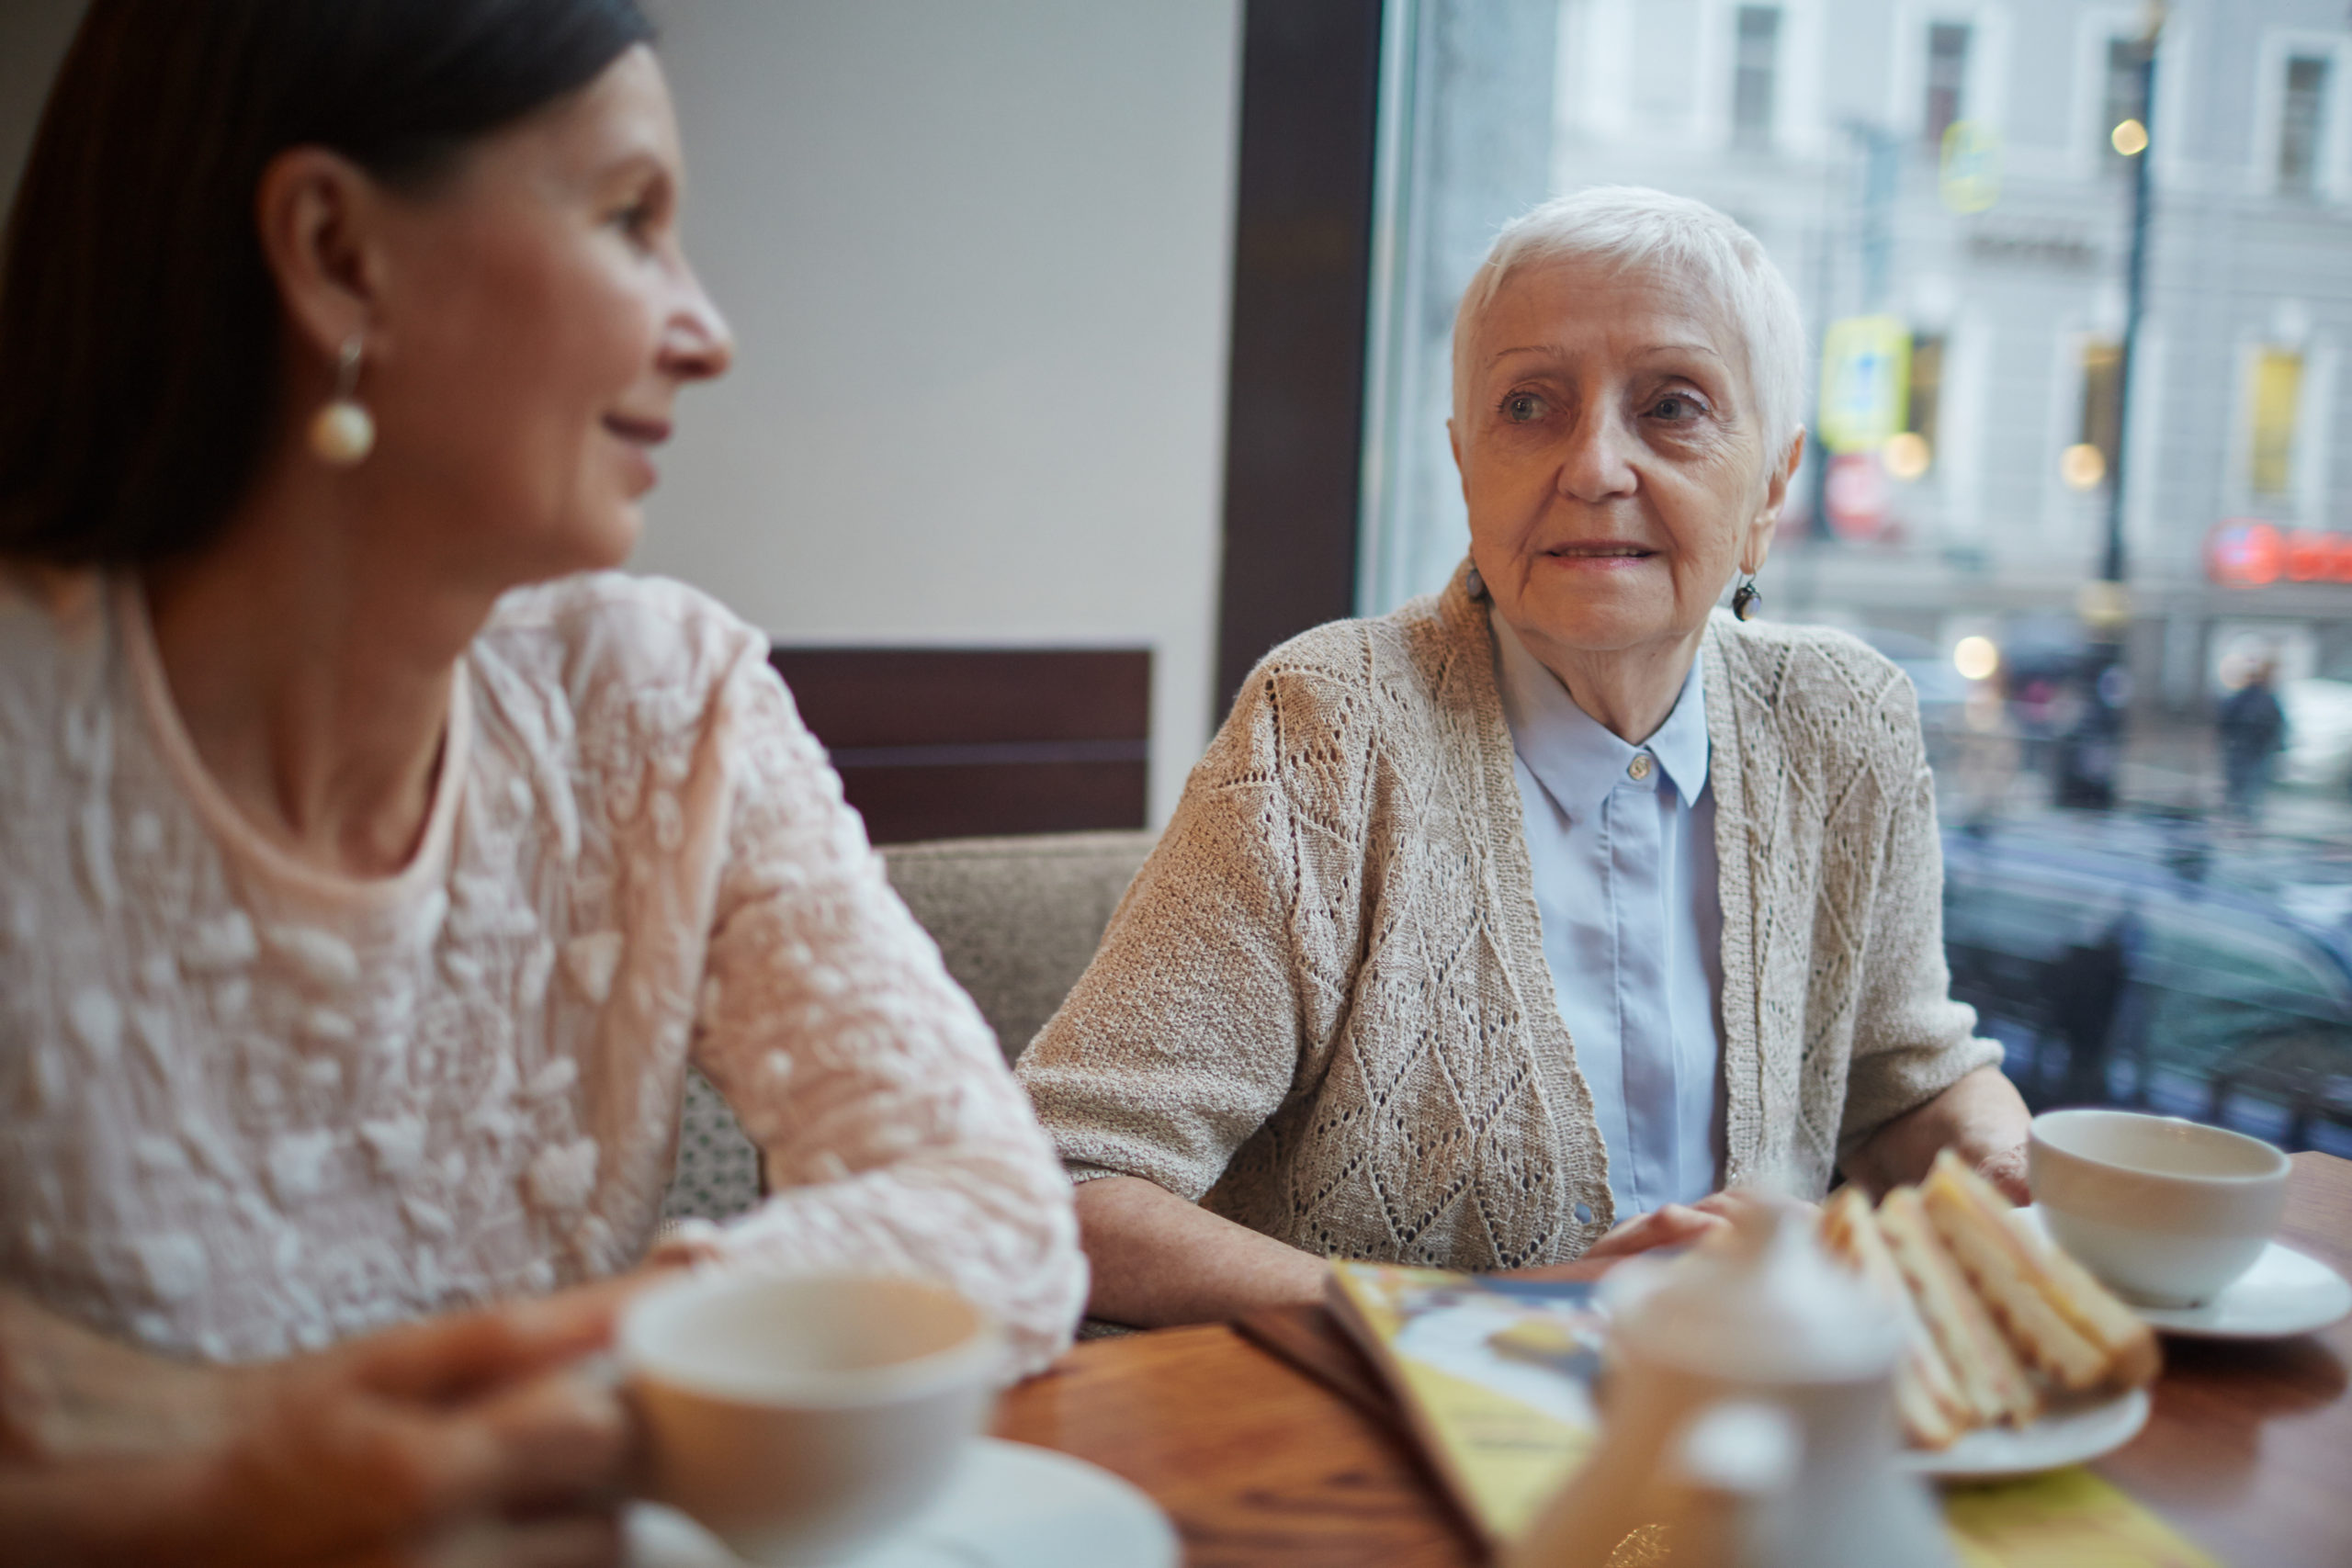 Older person sitting at a table, smiling warmly.